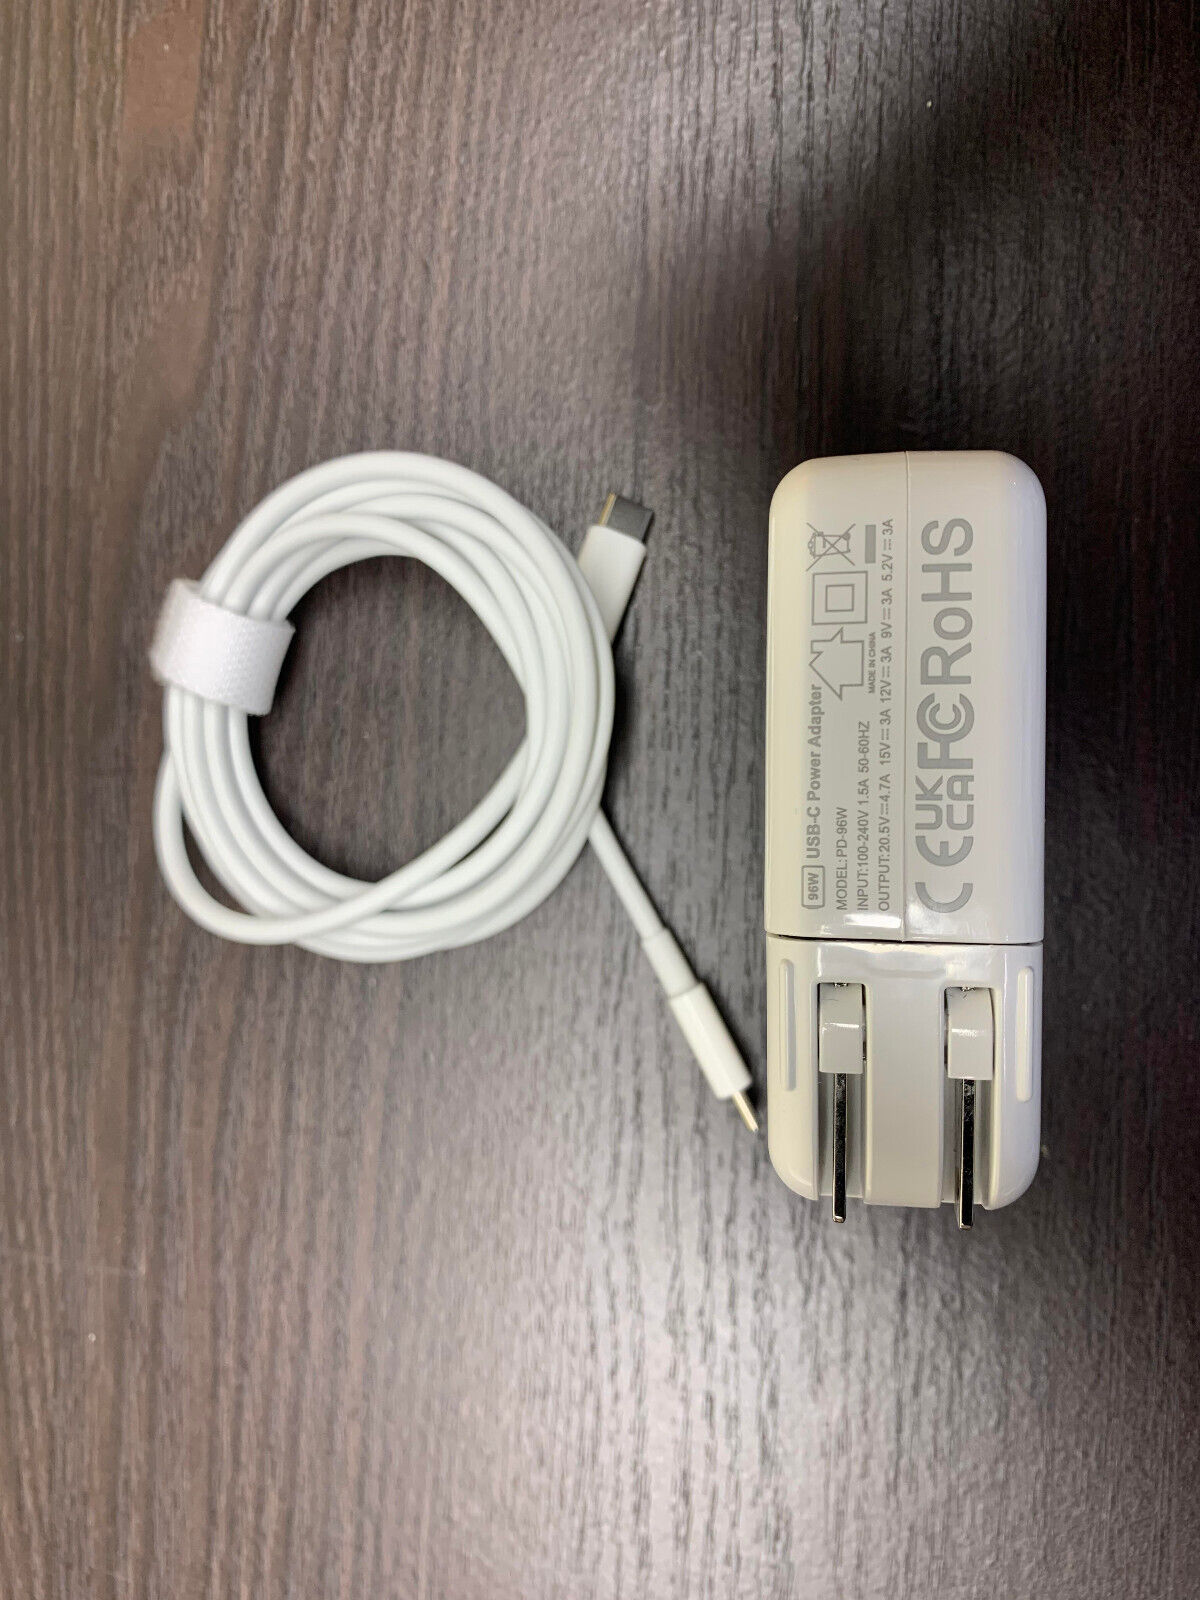 96W USB-C  Type C Charger Power Adapter and Cable for MacBook Pro - Adapteryasa